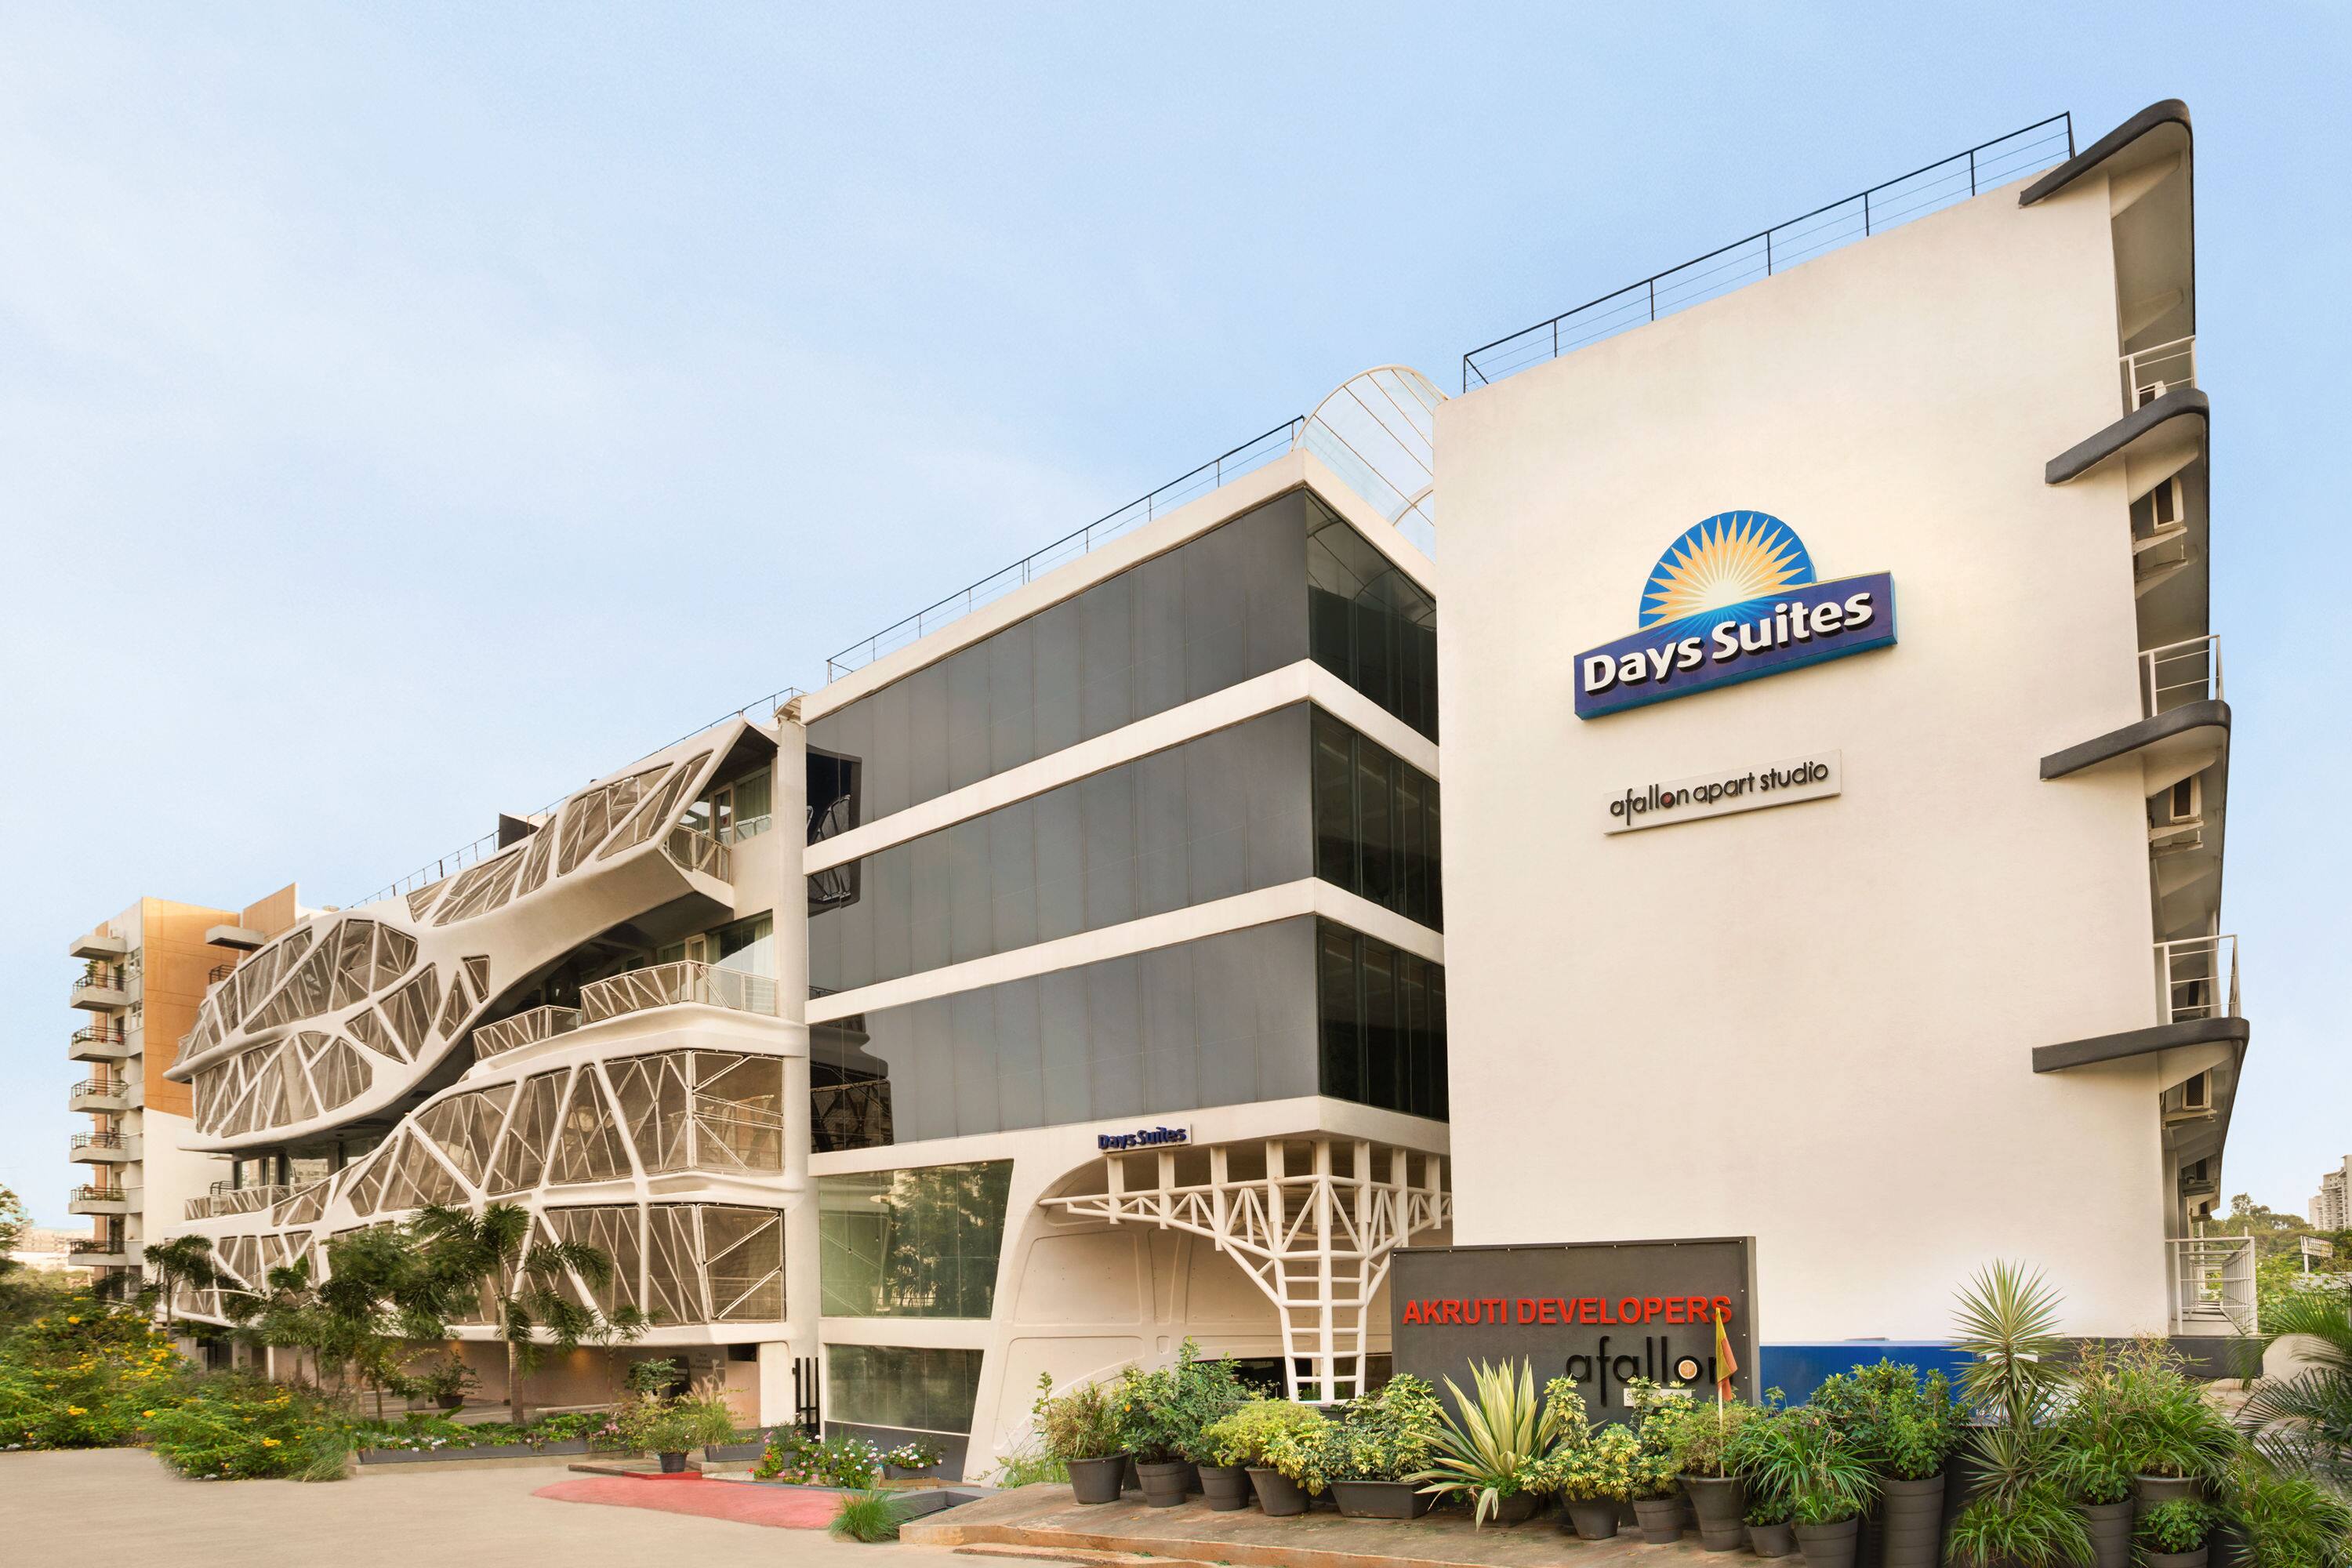 Couple Friendly Hotels in Bangalore - Brevistay Hotel Bangalore